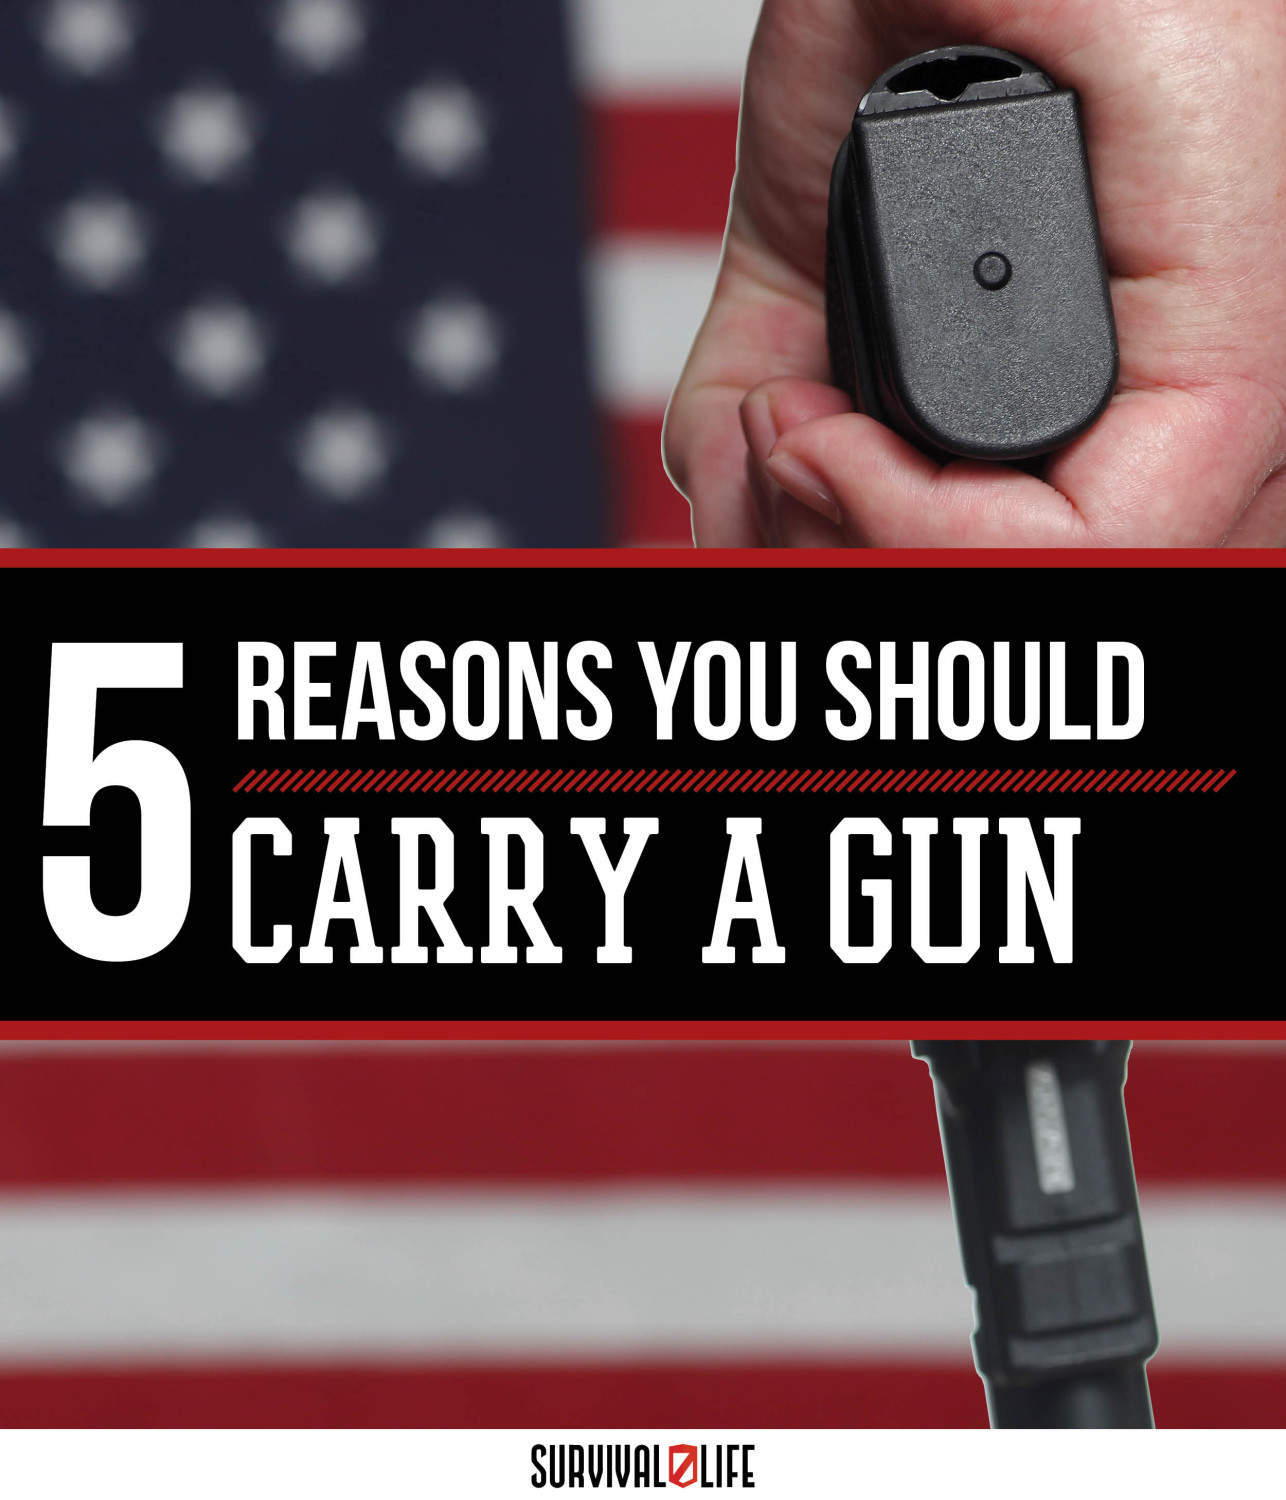 5 Reasons to Carry a Gun by Survival Life at http://survivallife.staging.wpengine.com/2015/05/29/why-carry-a-gun/